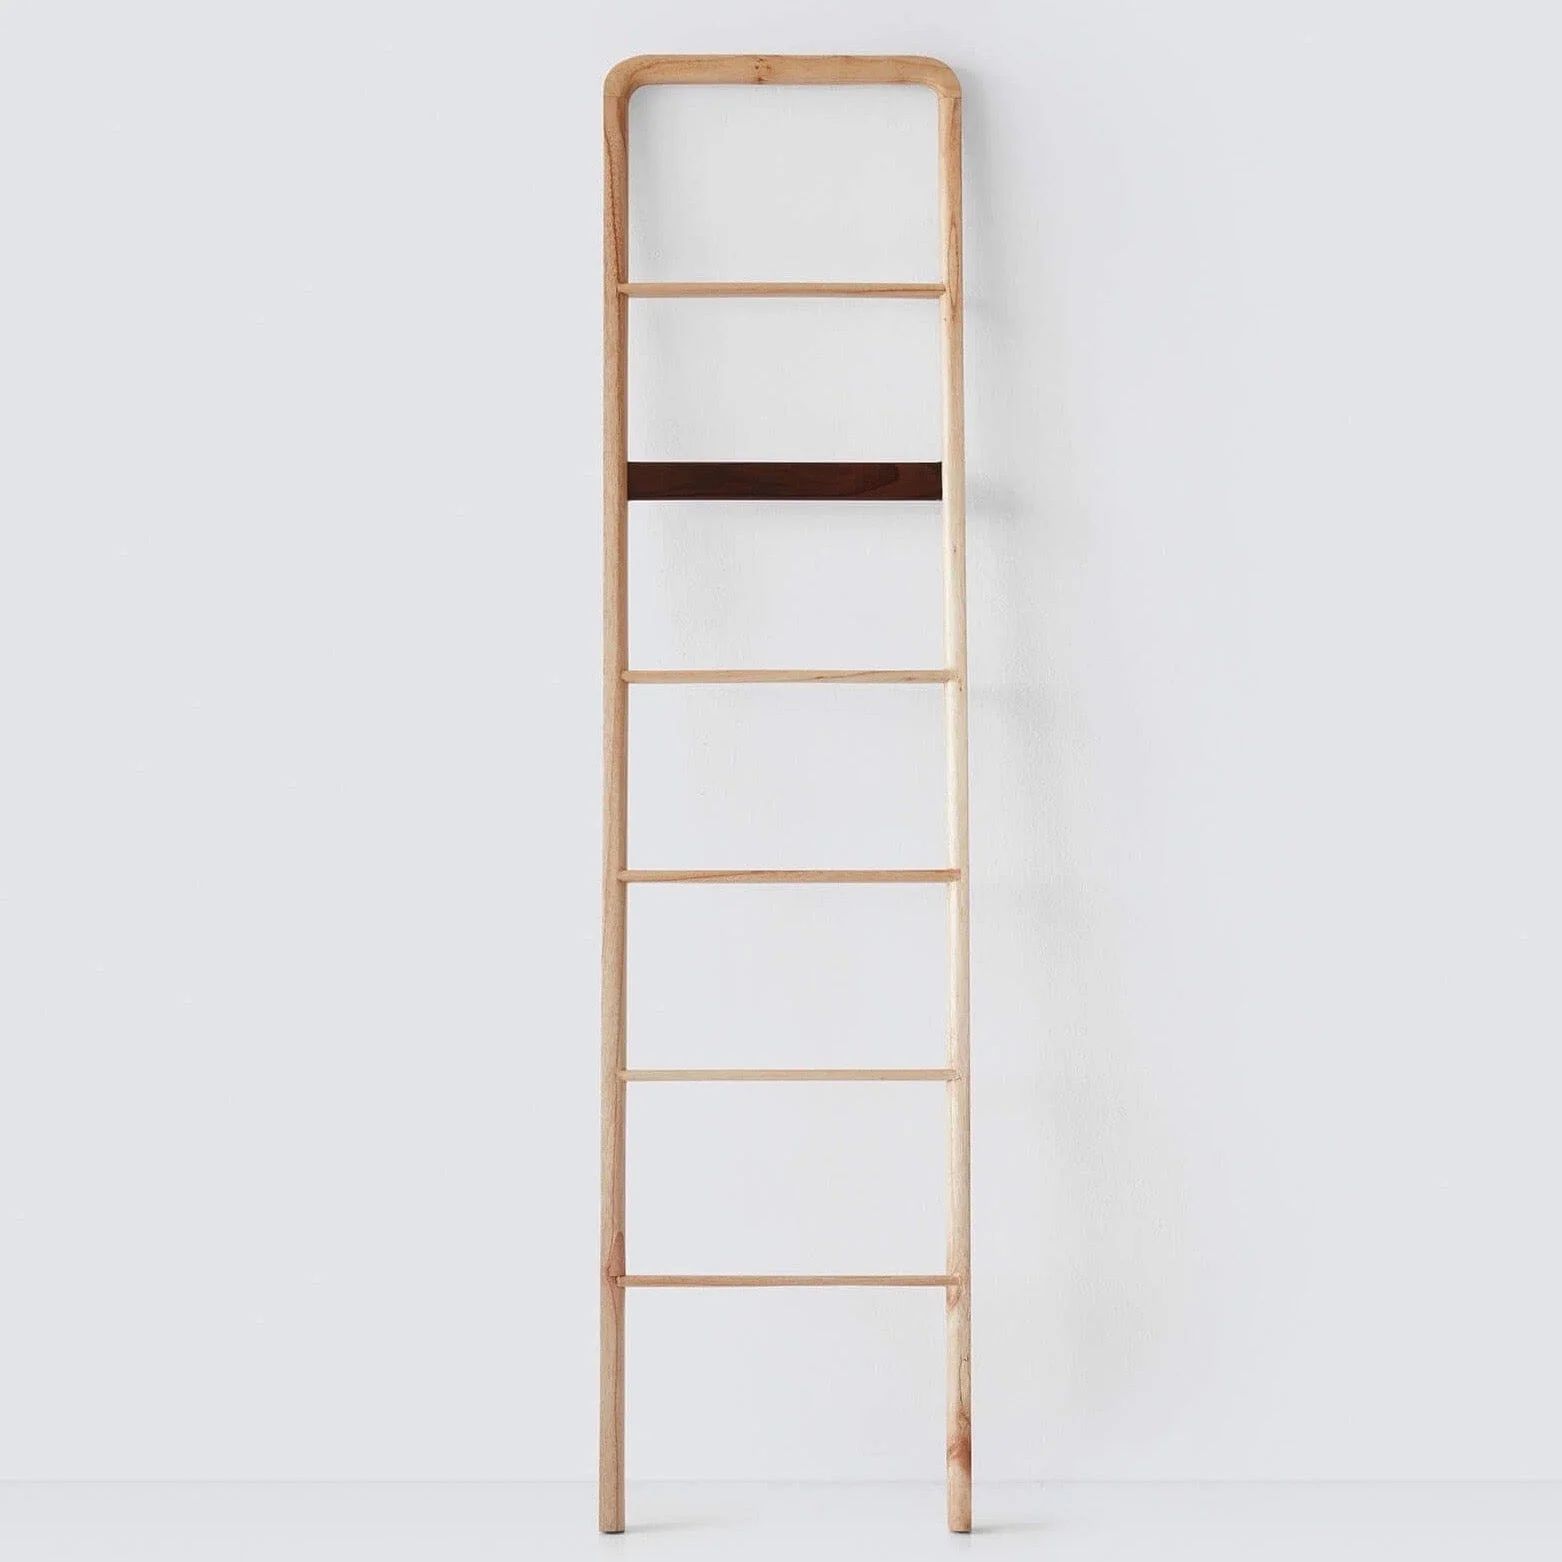 Modern Storage Ladder | Solid Wood Blanket Ladder   – The Citizenry | The Citizenry